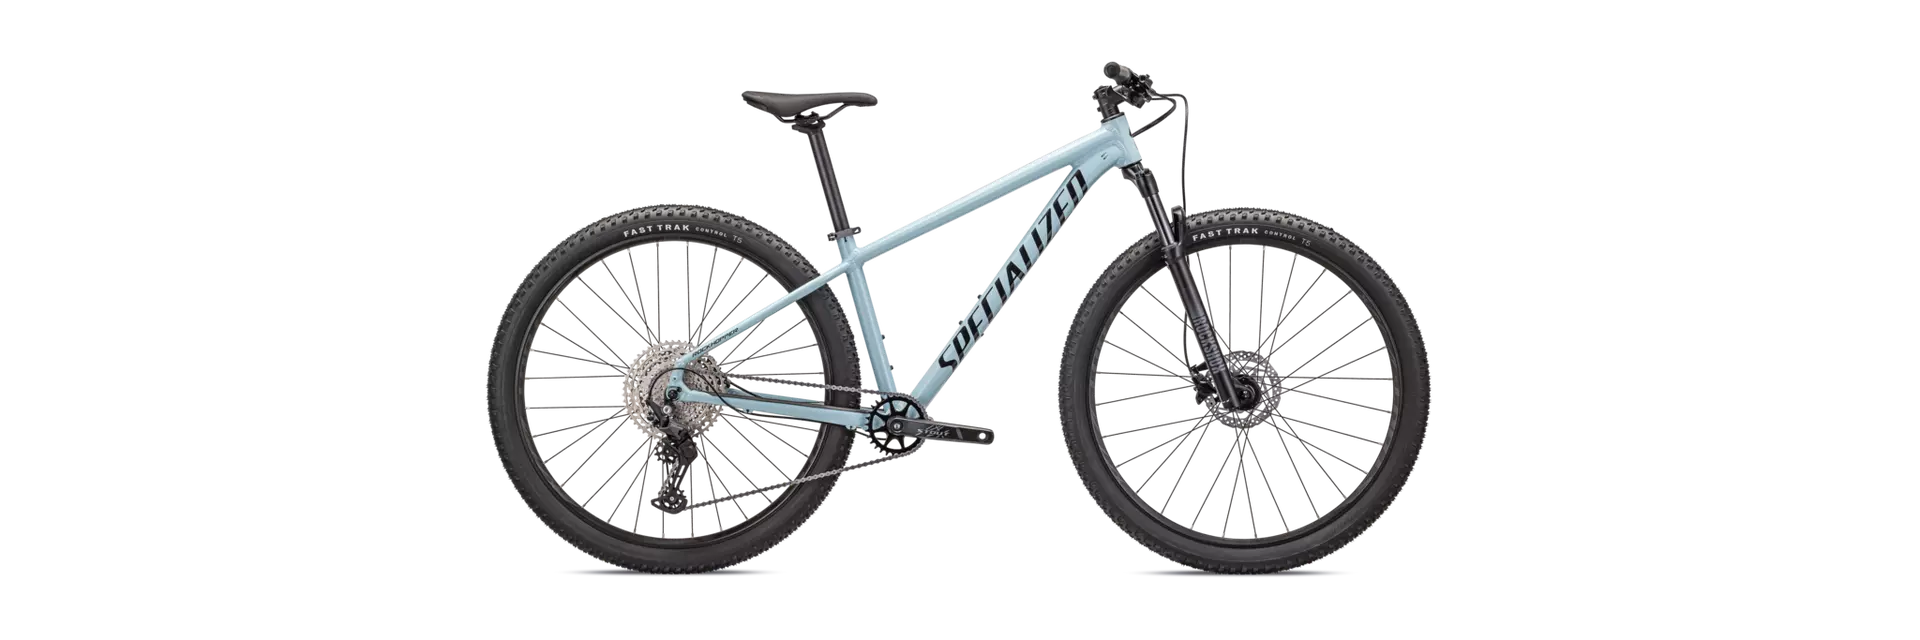 Specialized MTN Bike, Arctic Blue - Black side view